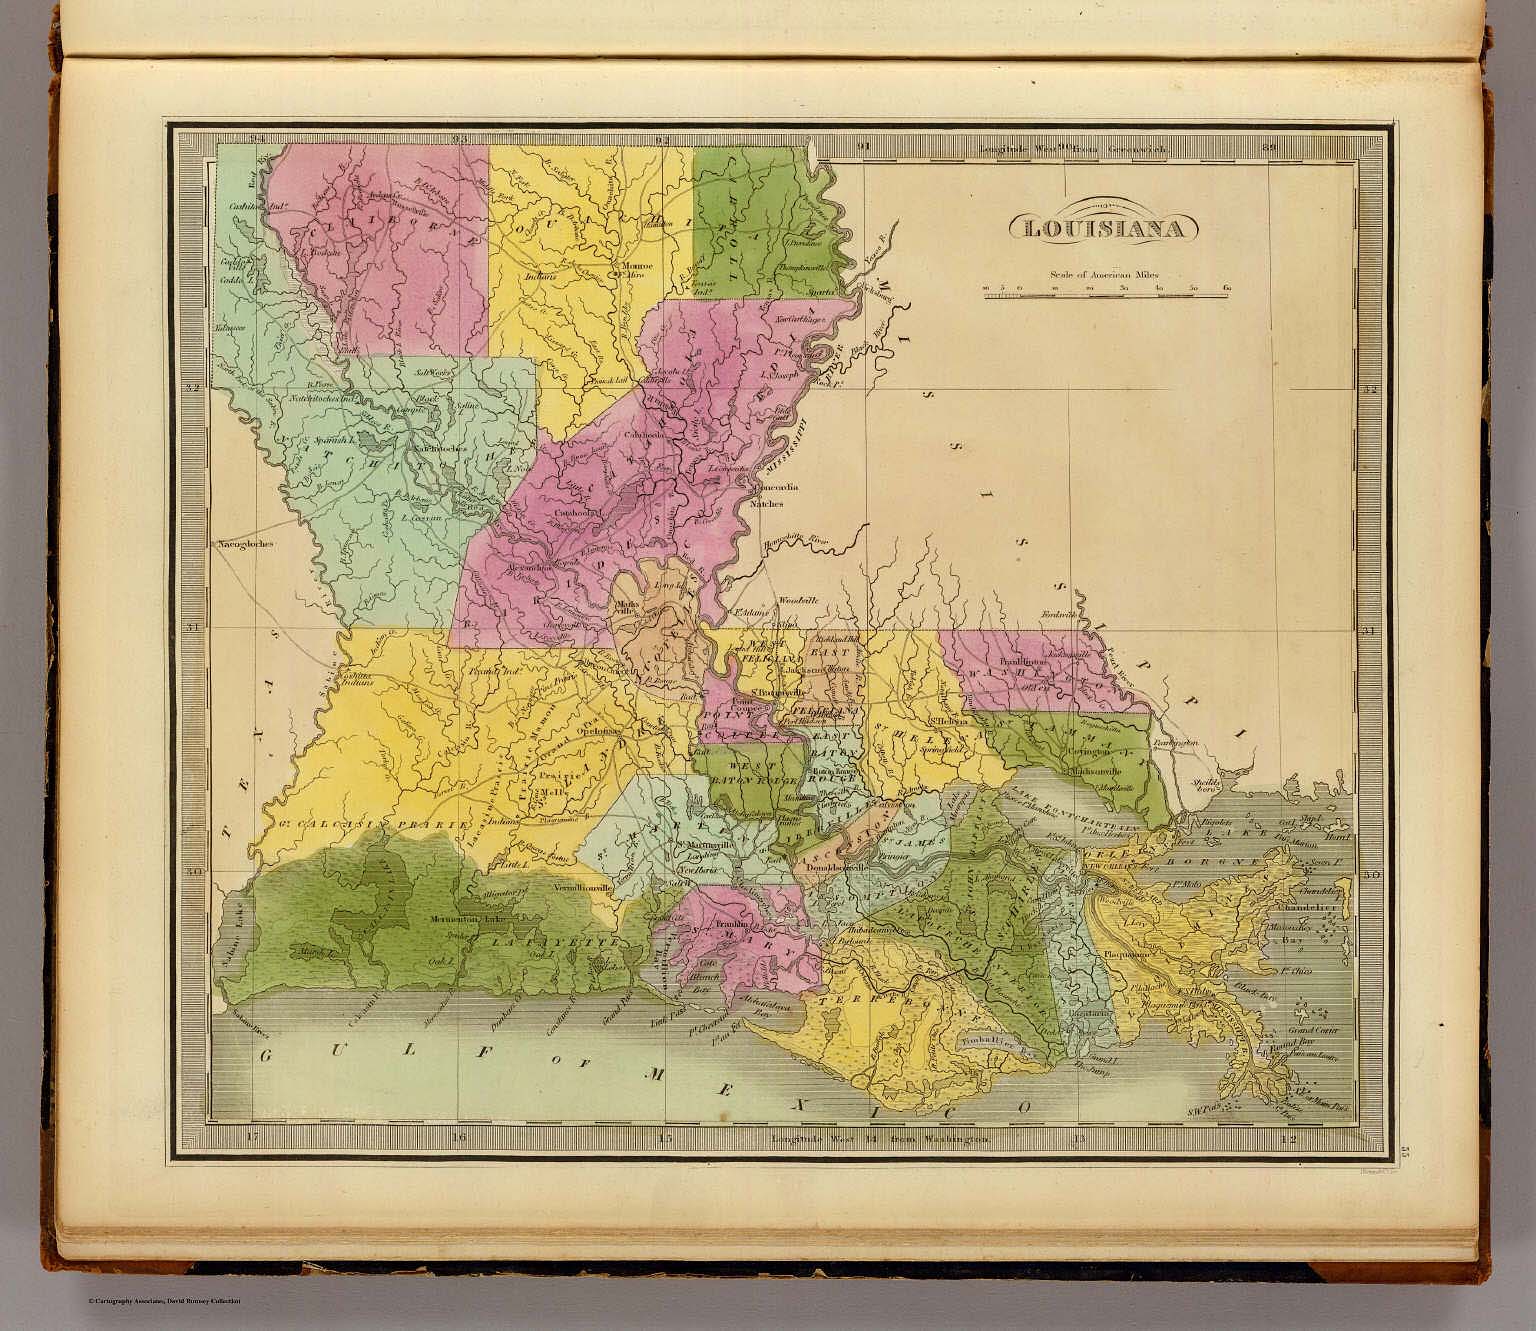 Louisiana David Rumsey Historical Map Collection 0755